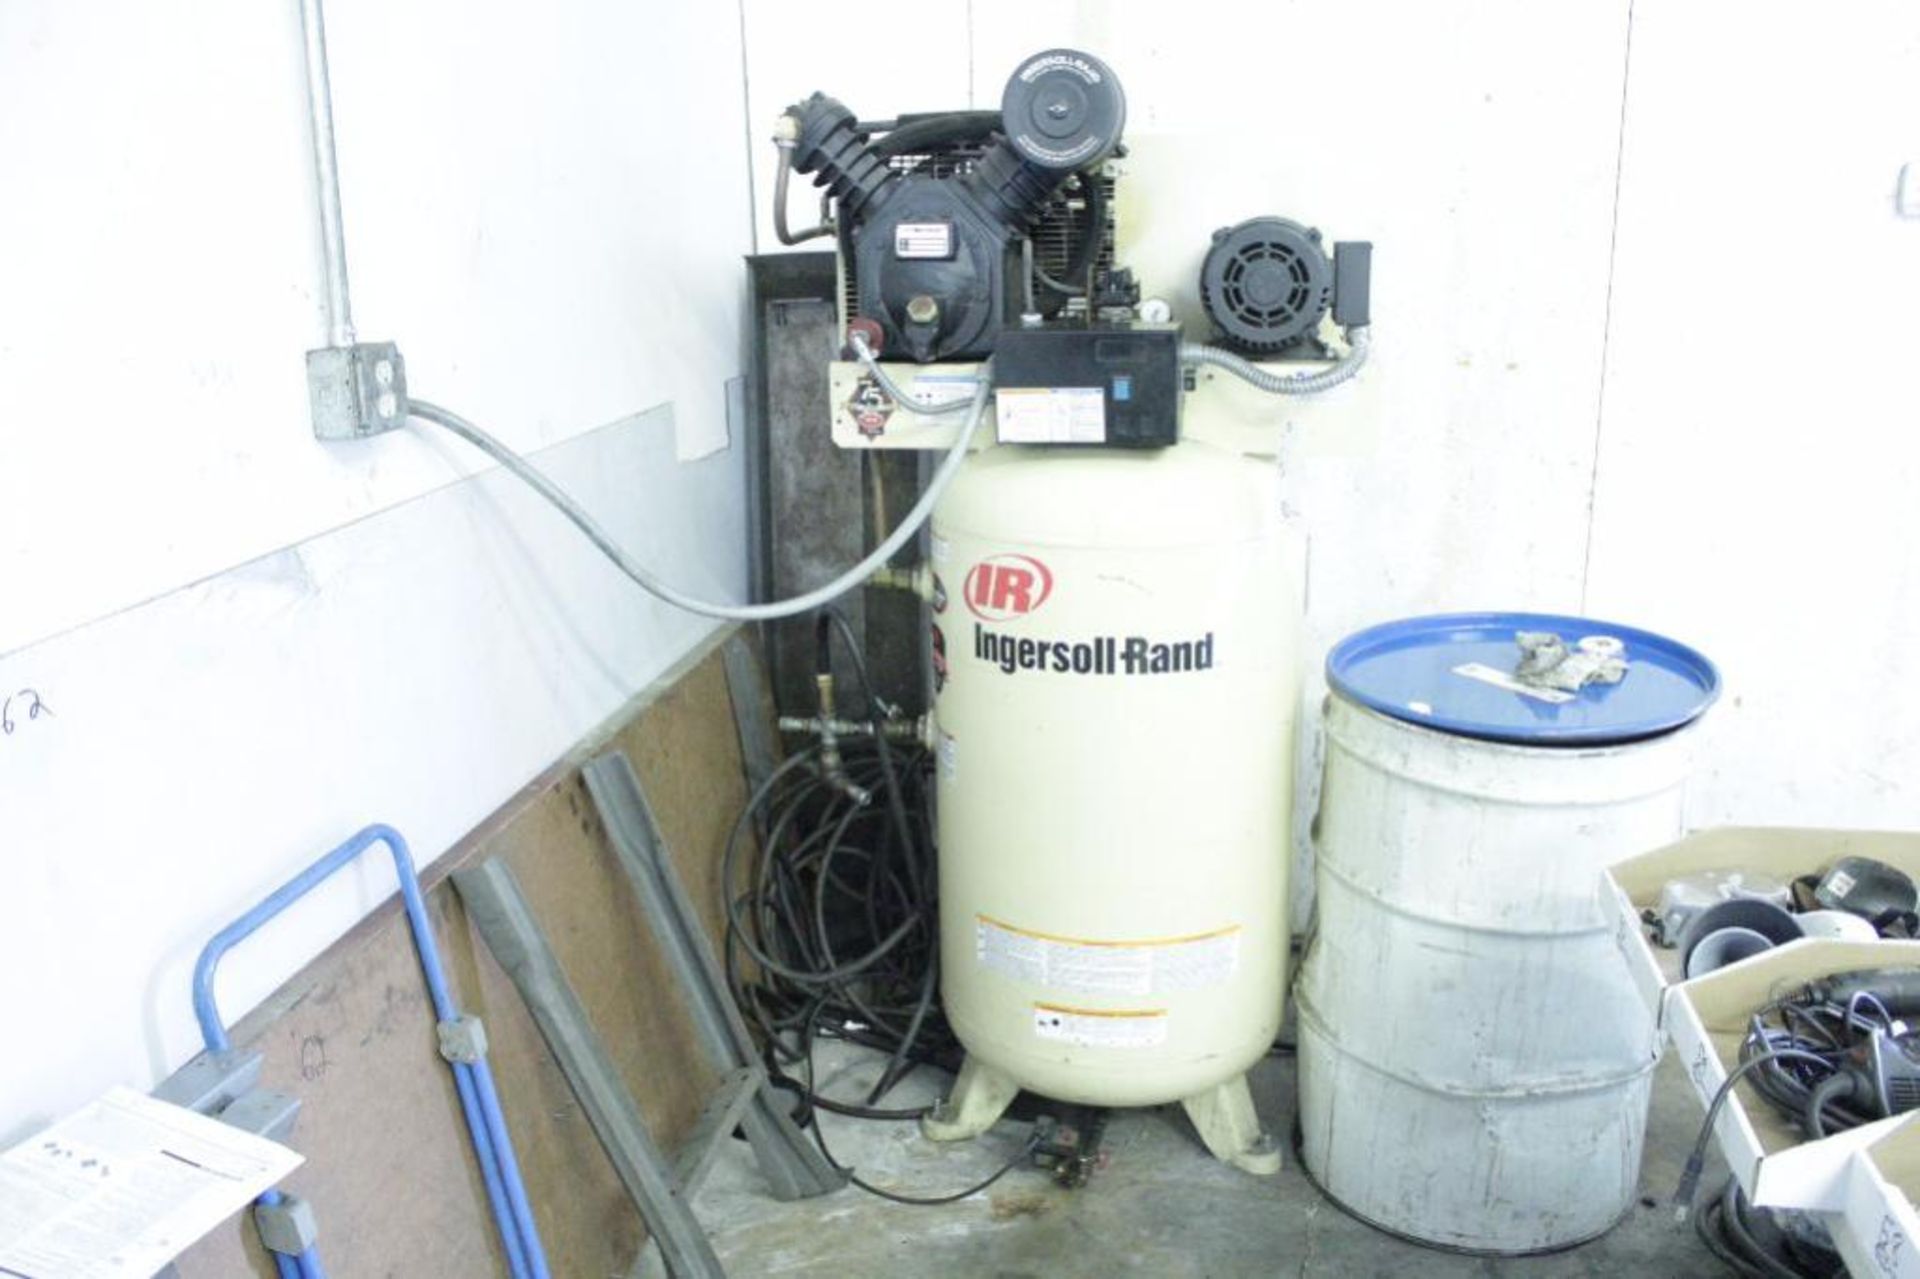 Ingersoll-Rand 7.5 HP Vertical Air Compressor - Image 7 of 7